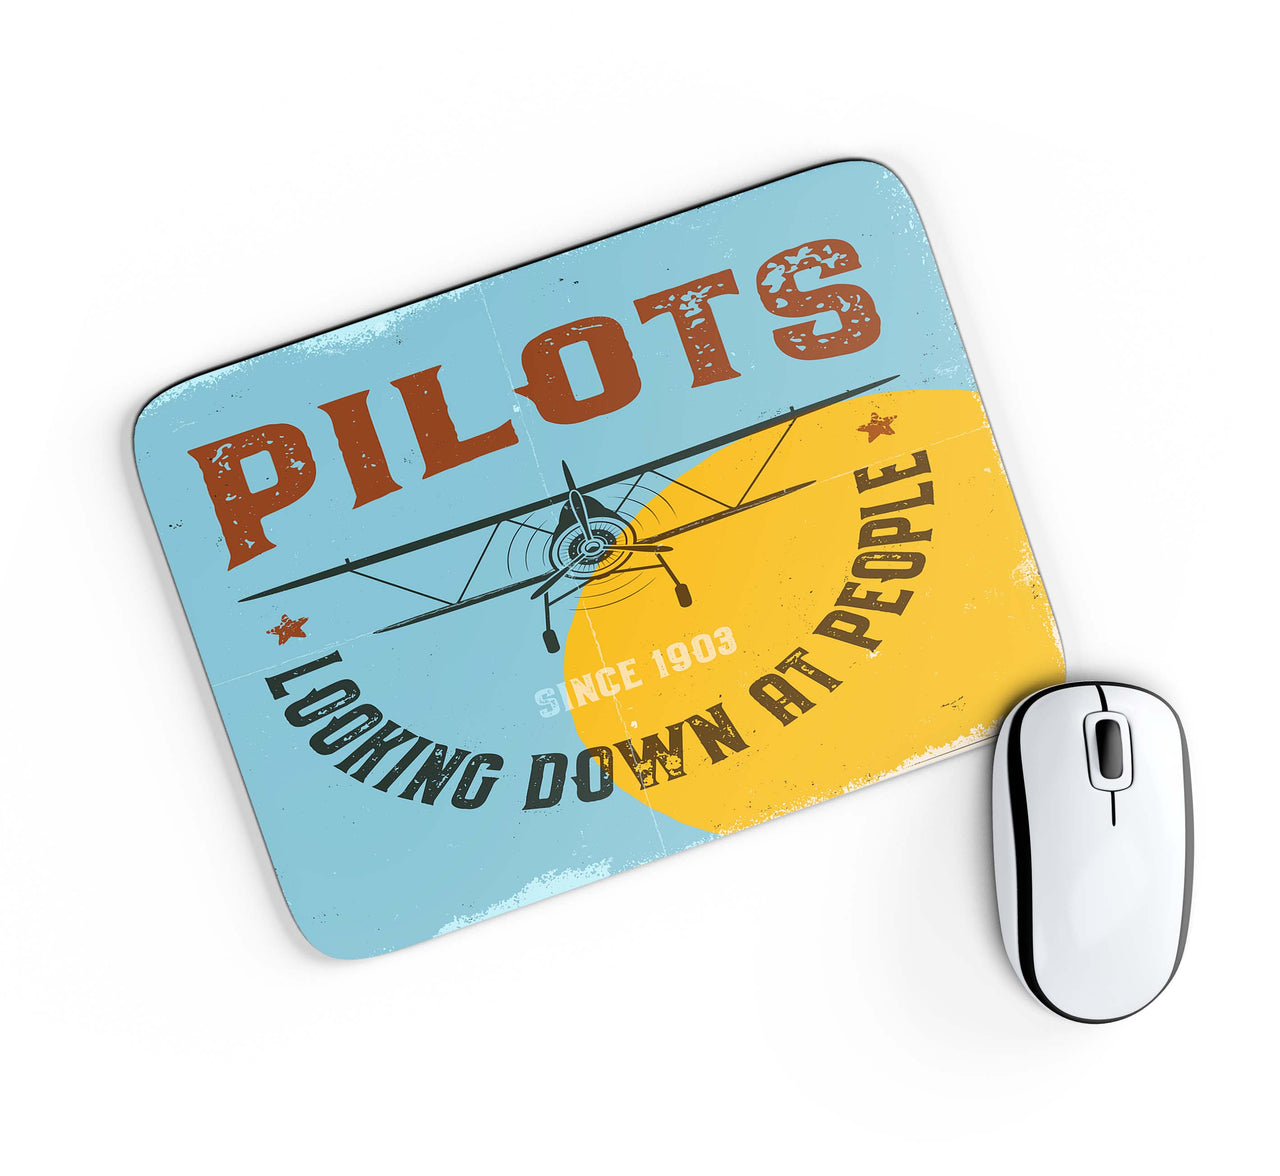 Pilots Looking Down at People Since 1903 Designed Mouse Pads